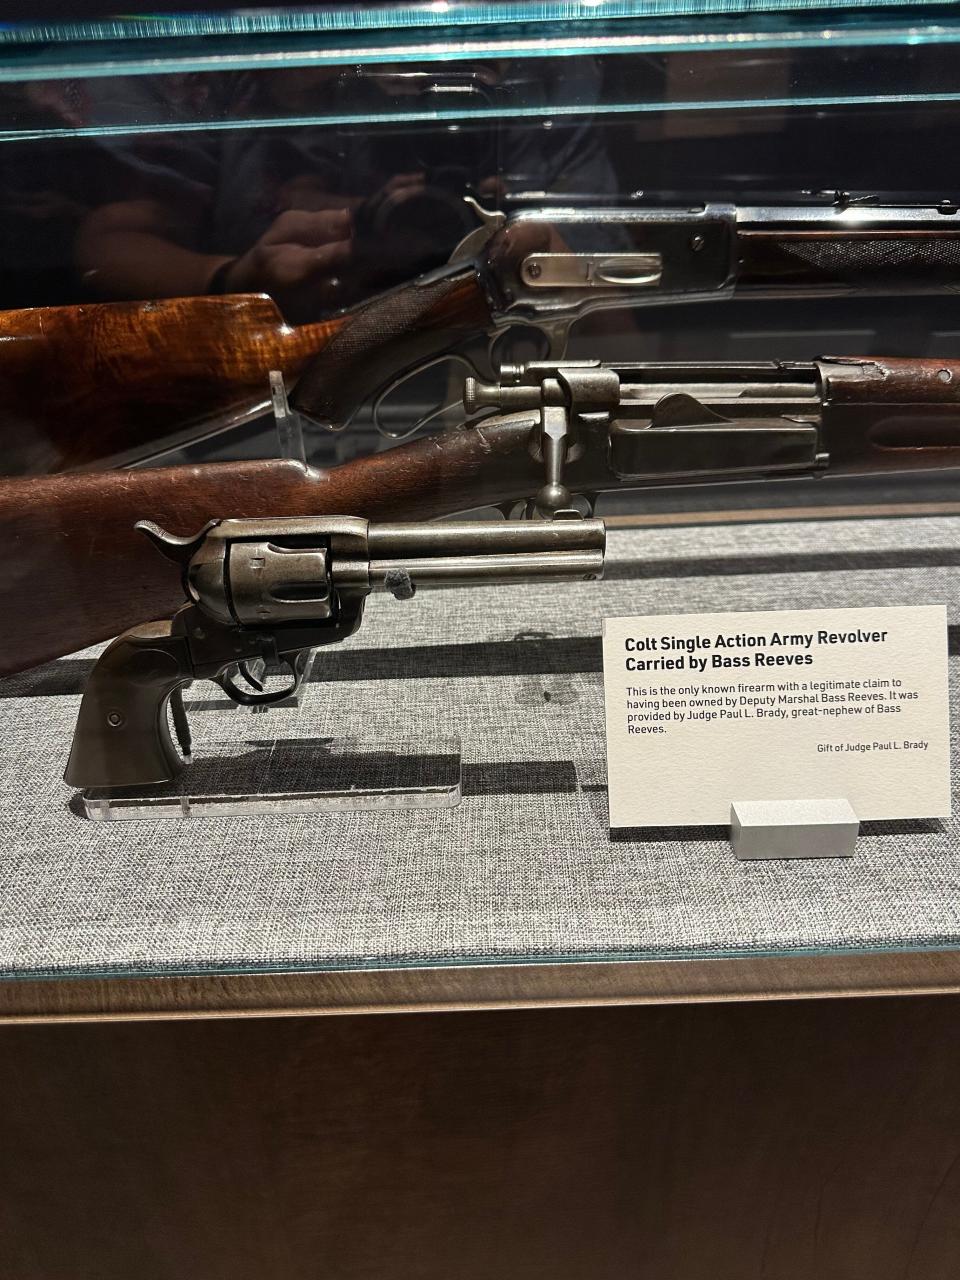 The Colt single-action Army revolver used by legendary U.S. deputy marshal Bass Reeves is on display at the U.S. Marshals Museum in Fort Smith, Arkansas.